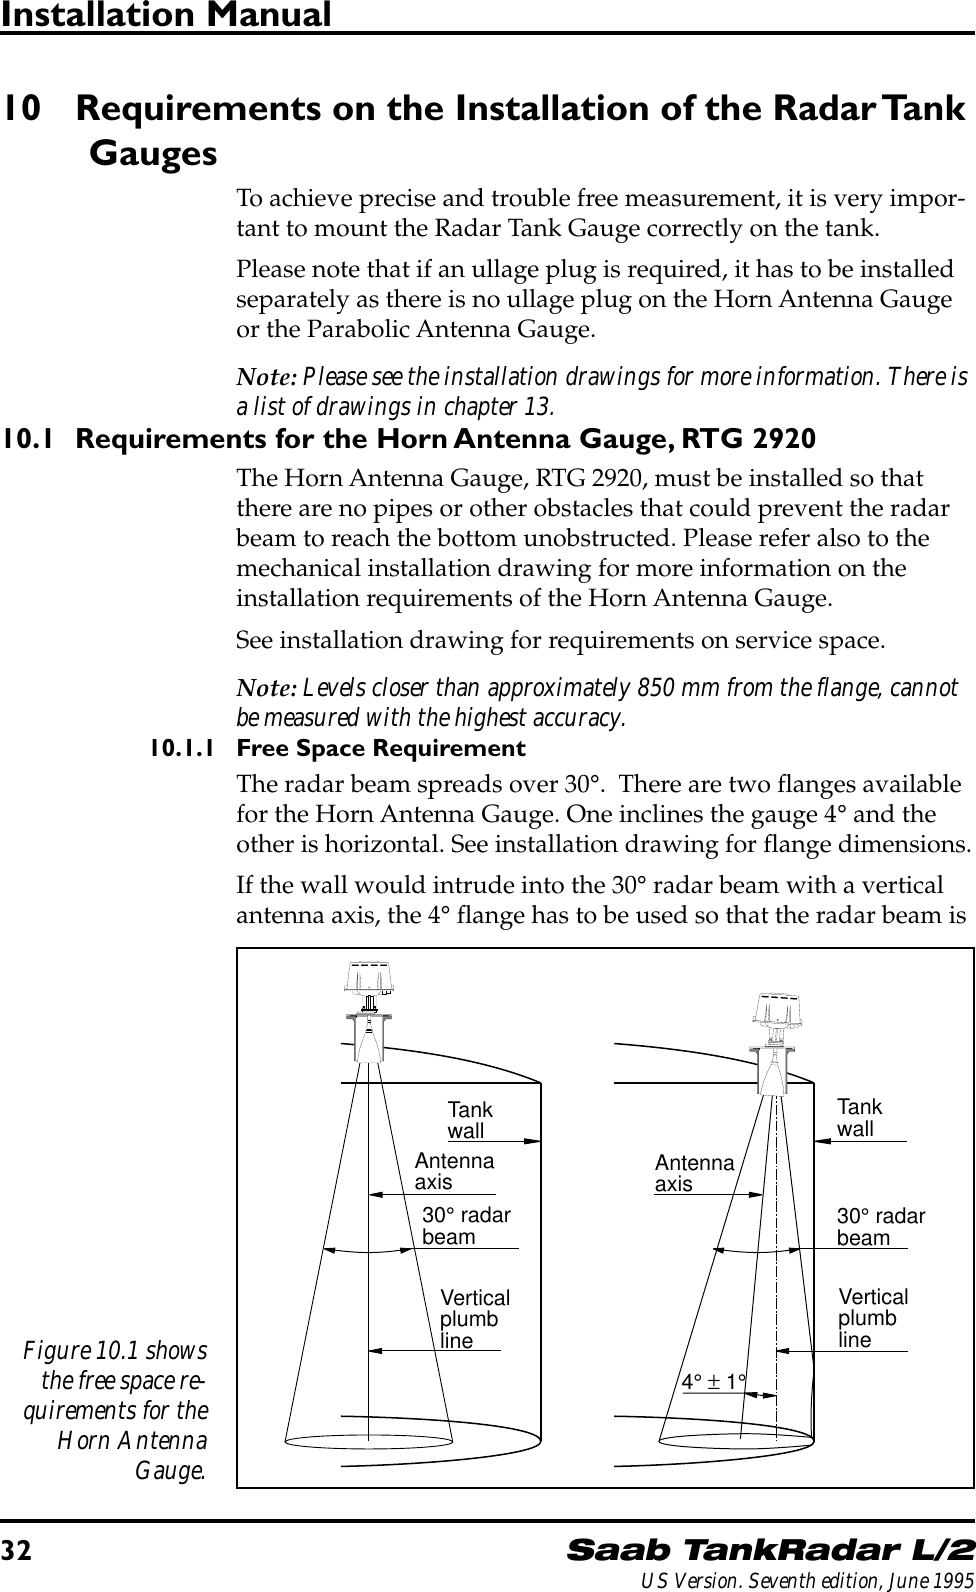 32Saab TankRadar L/2US Version. Seventh edition, June 1995Installation Manual10 Requirements on the Installation of the Radar TankGaugesTo achieve precise and trouble free measurement, it is very impor-tant to mount the Radar Tank Gauge correctly on the tank.Please note that if an ullage plug is required, it has to be installedseparately as there is no ullage plug on the Horn Antenna Gaugeor the Parabolic Antenna Gauge.Note: Please see the installation drawings for more information. There isa list of drawings in chapter 13.10.1 Requirements for the Horn Antenna Gauge, RTG 2920The Horn Antenna Gauge, RTG 2920, must be installed so thatthere are no pipes or other obstacles that could prevent the radarbeam to reach the bottom unobstructed. Please refer also to themechanical installation drawing for more information on theinstallation requirements of the Horn Antenna Gauge.See installation drawing for requirements on service space.Note: Levels closer than approximately 850 mm from the flange, cannotbe measured with the highest accuracy.10.1.1 Free Space RequirementThe radar beam spreads over 30°.  There are two flanges availablefor the Horn Antenna Gauge. One inclines the gauge 4° and theother is horizontal. See installation drawing for flange dimensions.If the wall would intrude into the 30° radar beam with a verticalantenna axis, the 4° flange has to be used so that the radar beam isAntennaaxisTankwallVerticalplumbline4° ± 1°30° radarbeamAntennaaxisTankwallVerticalplumbline30° radarbeamFigure 10.1 showsthe free space re-quirements for theHorn AntennaGauge.